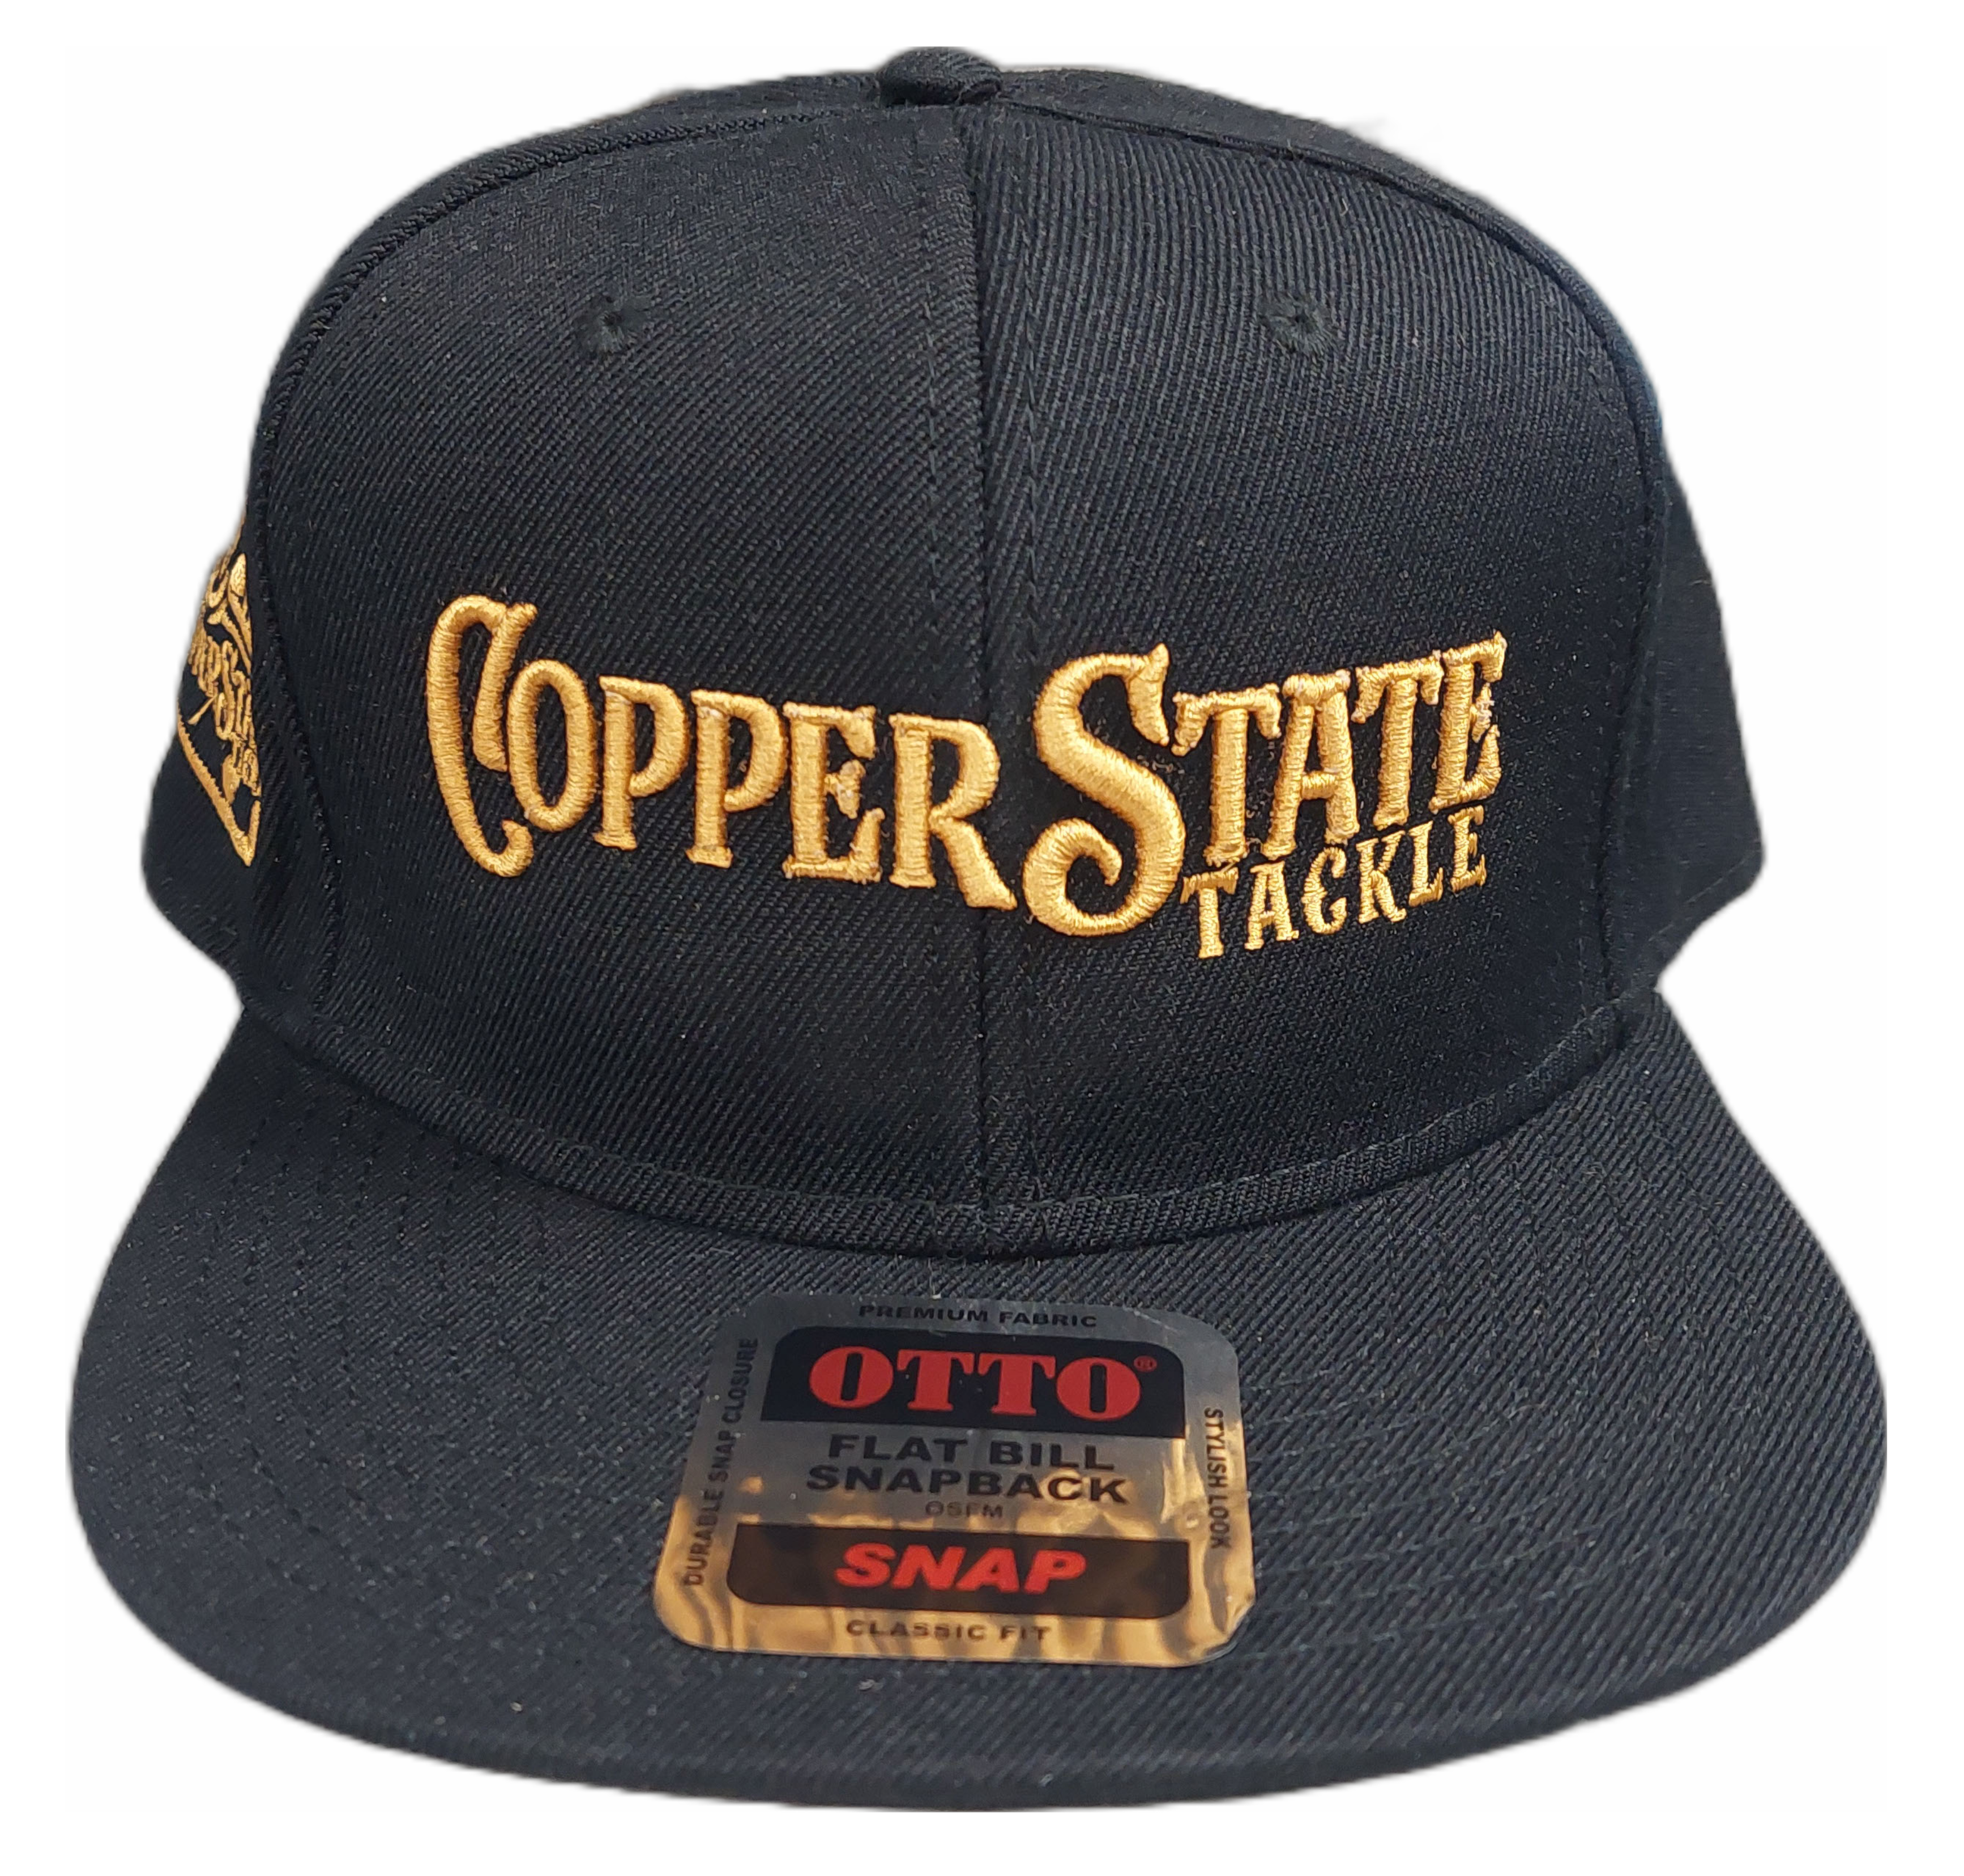 Apparel hat  Copperstate Tackle